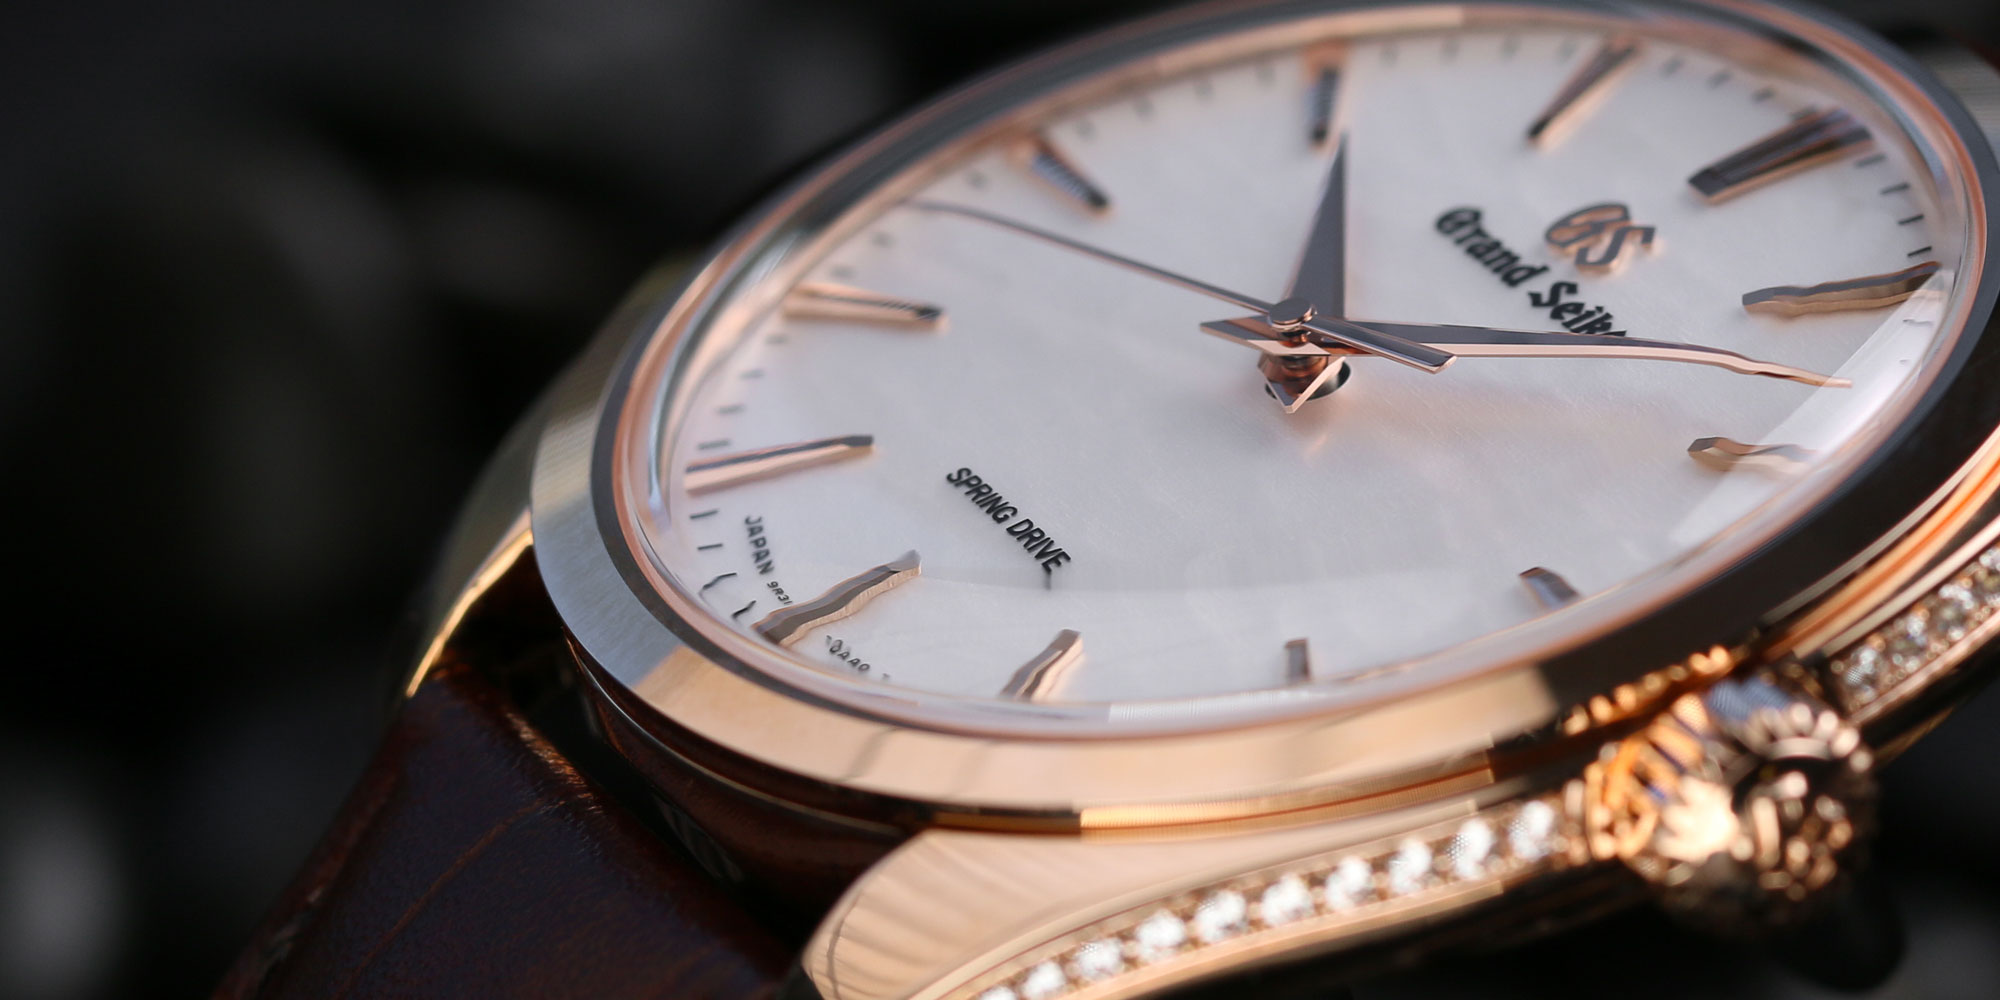 Dial closeup (off angle) of Grand Seiko SBGY008 18k gold watch.